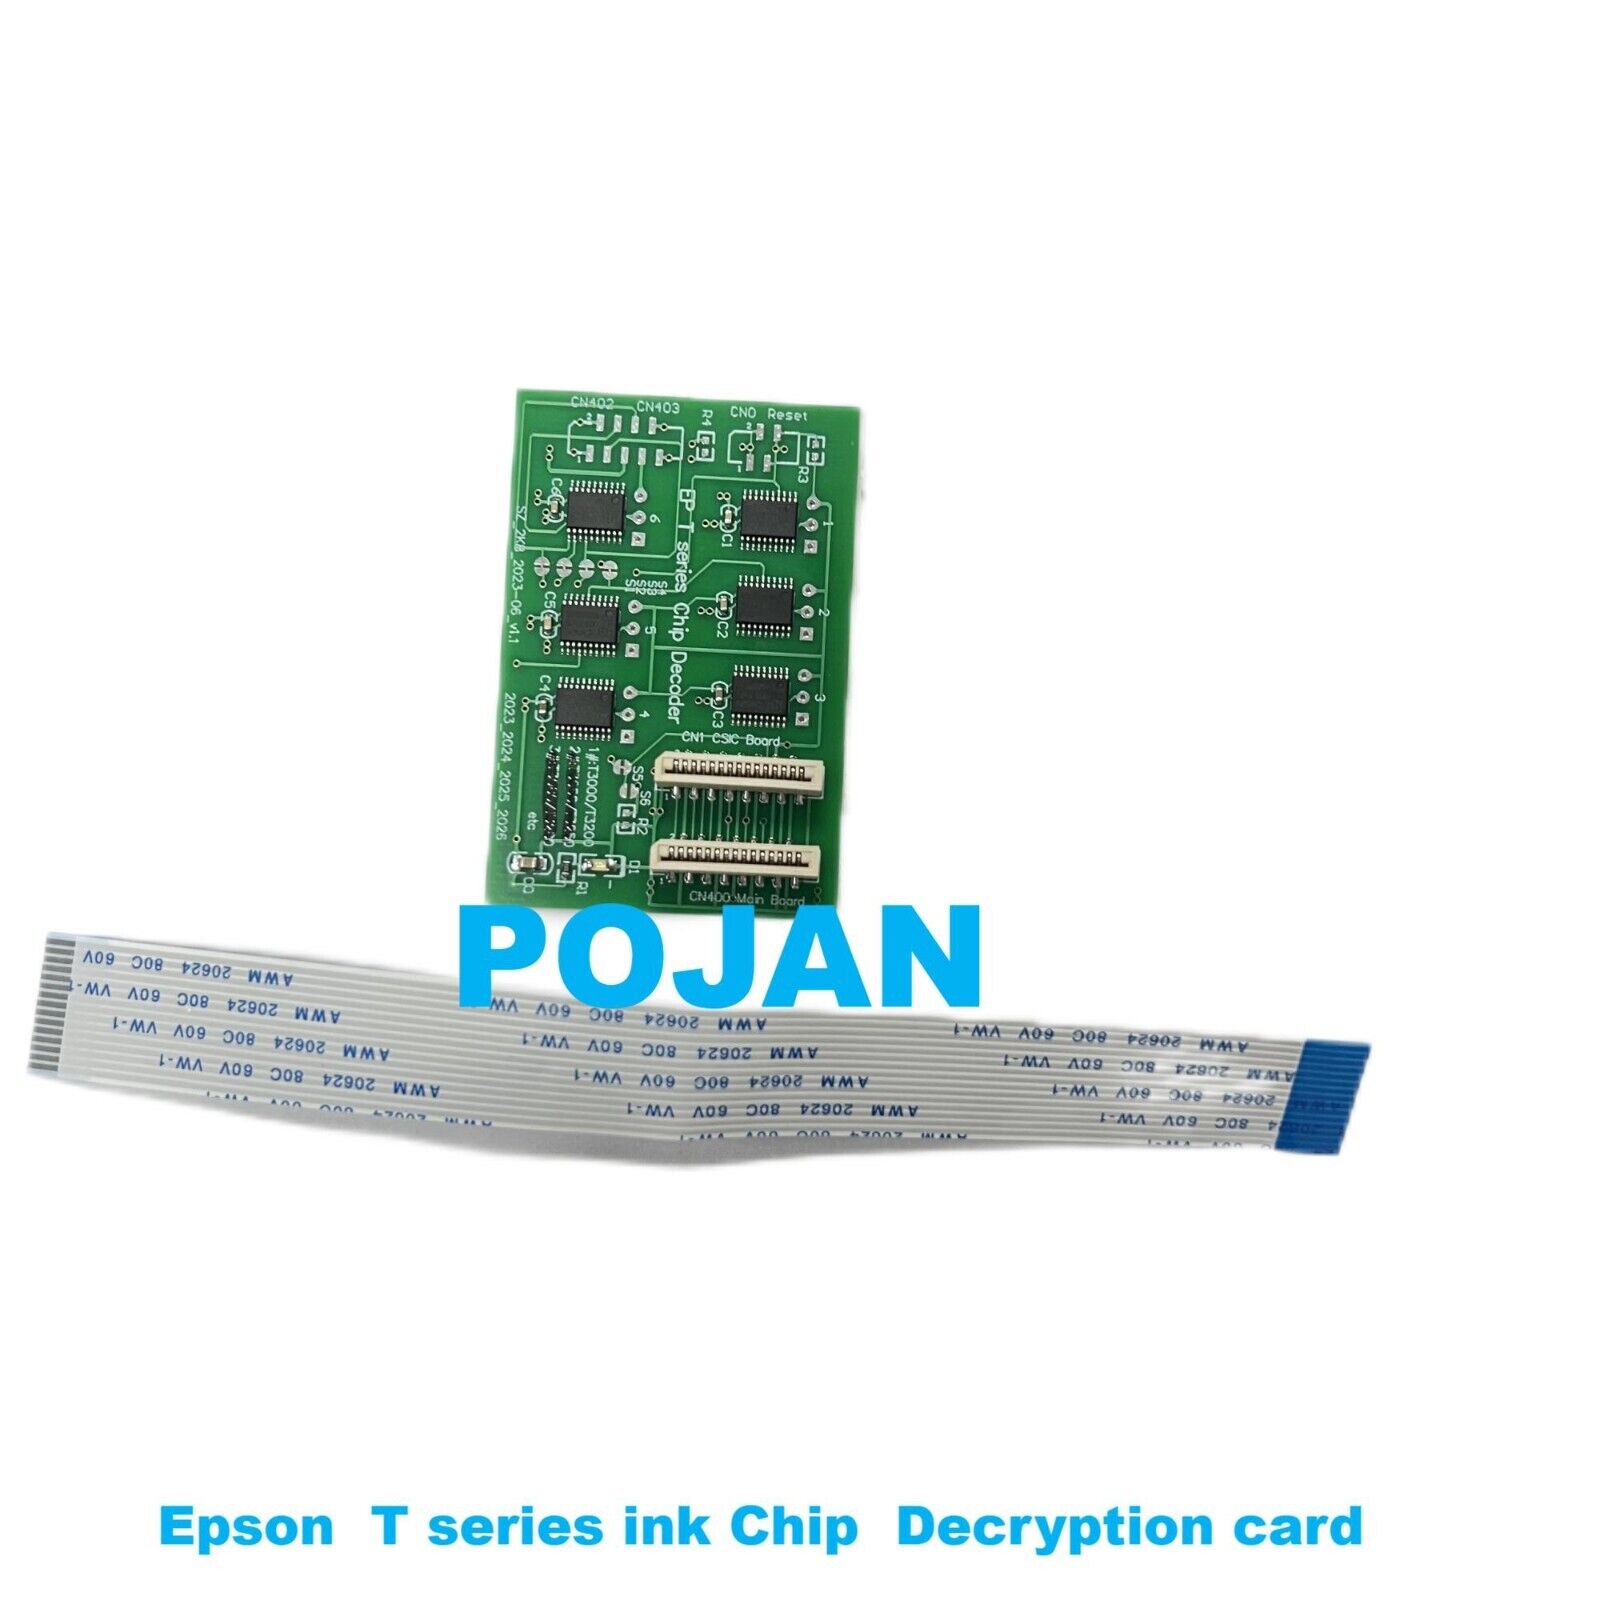 Decryption Card Ink Chip Decoder For Epson SureColor T3000 T5000 T7000 Series